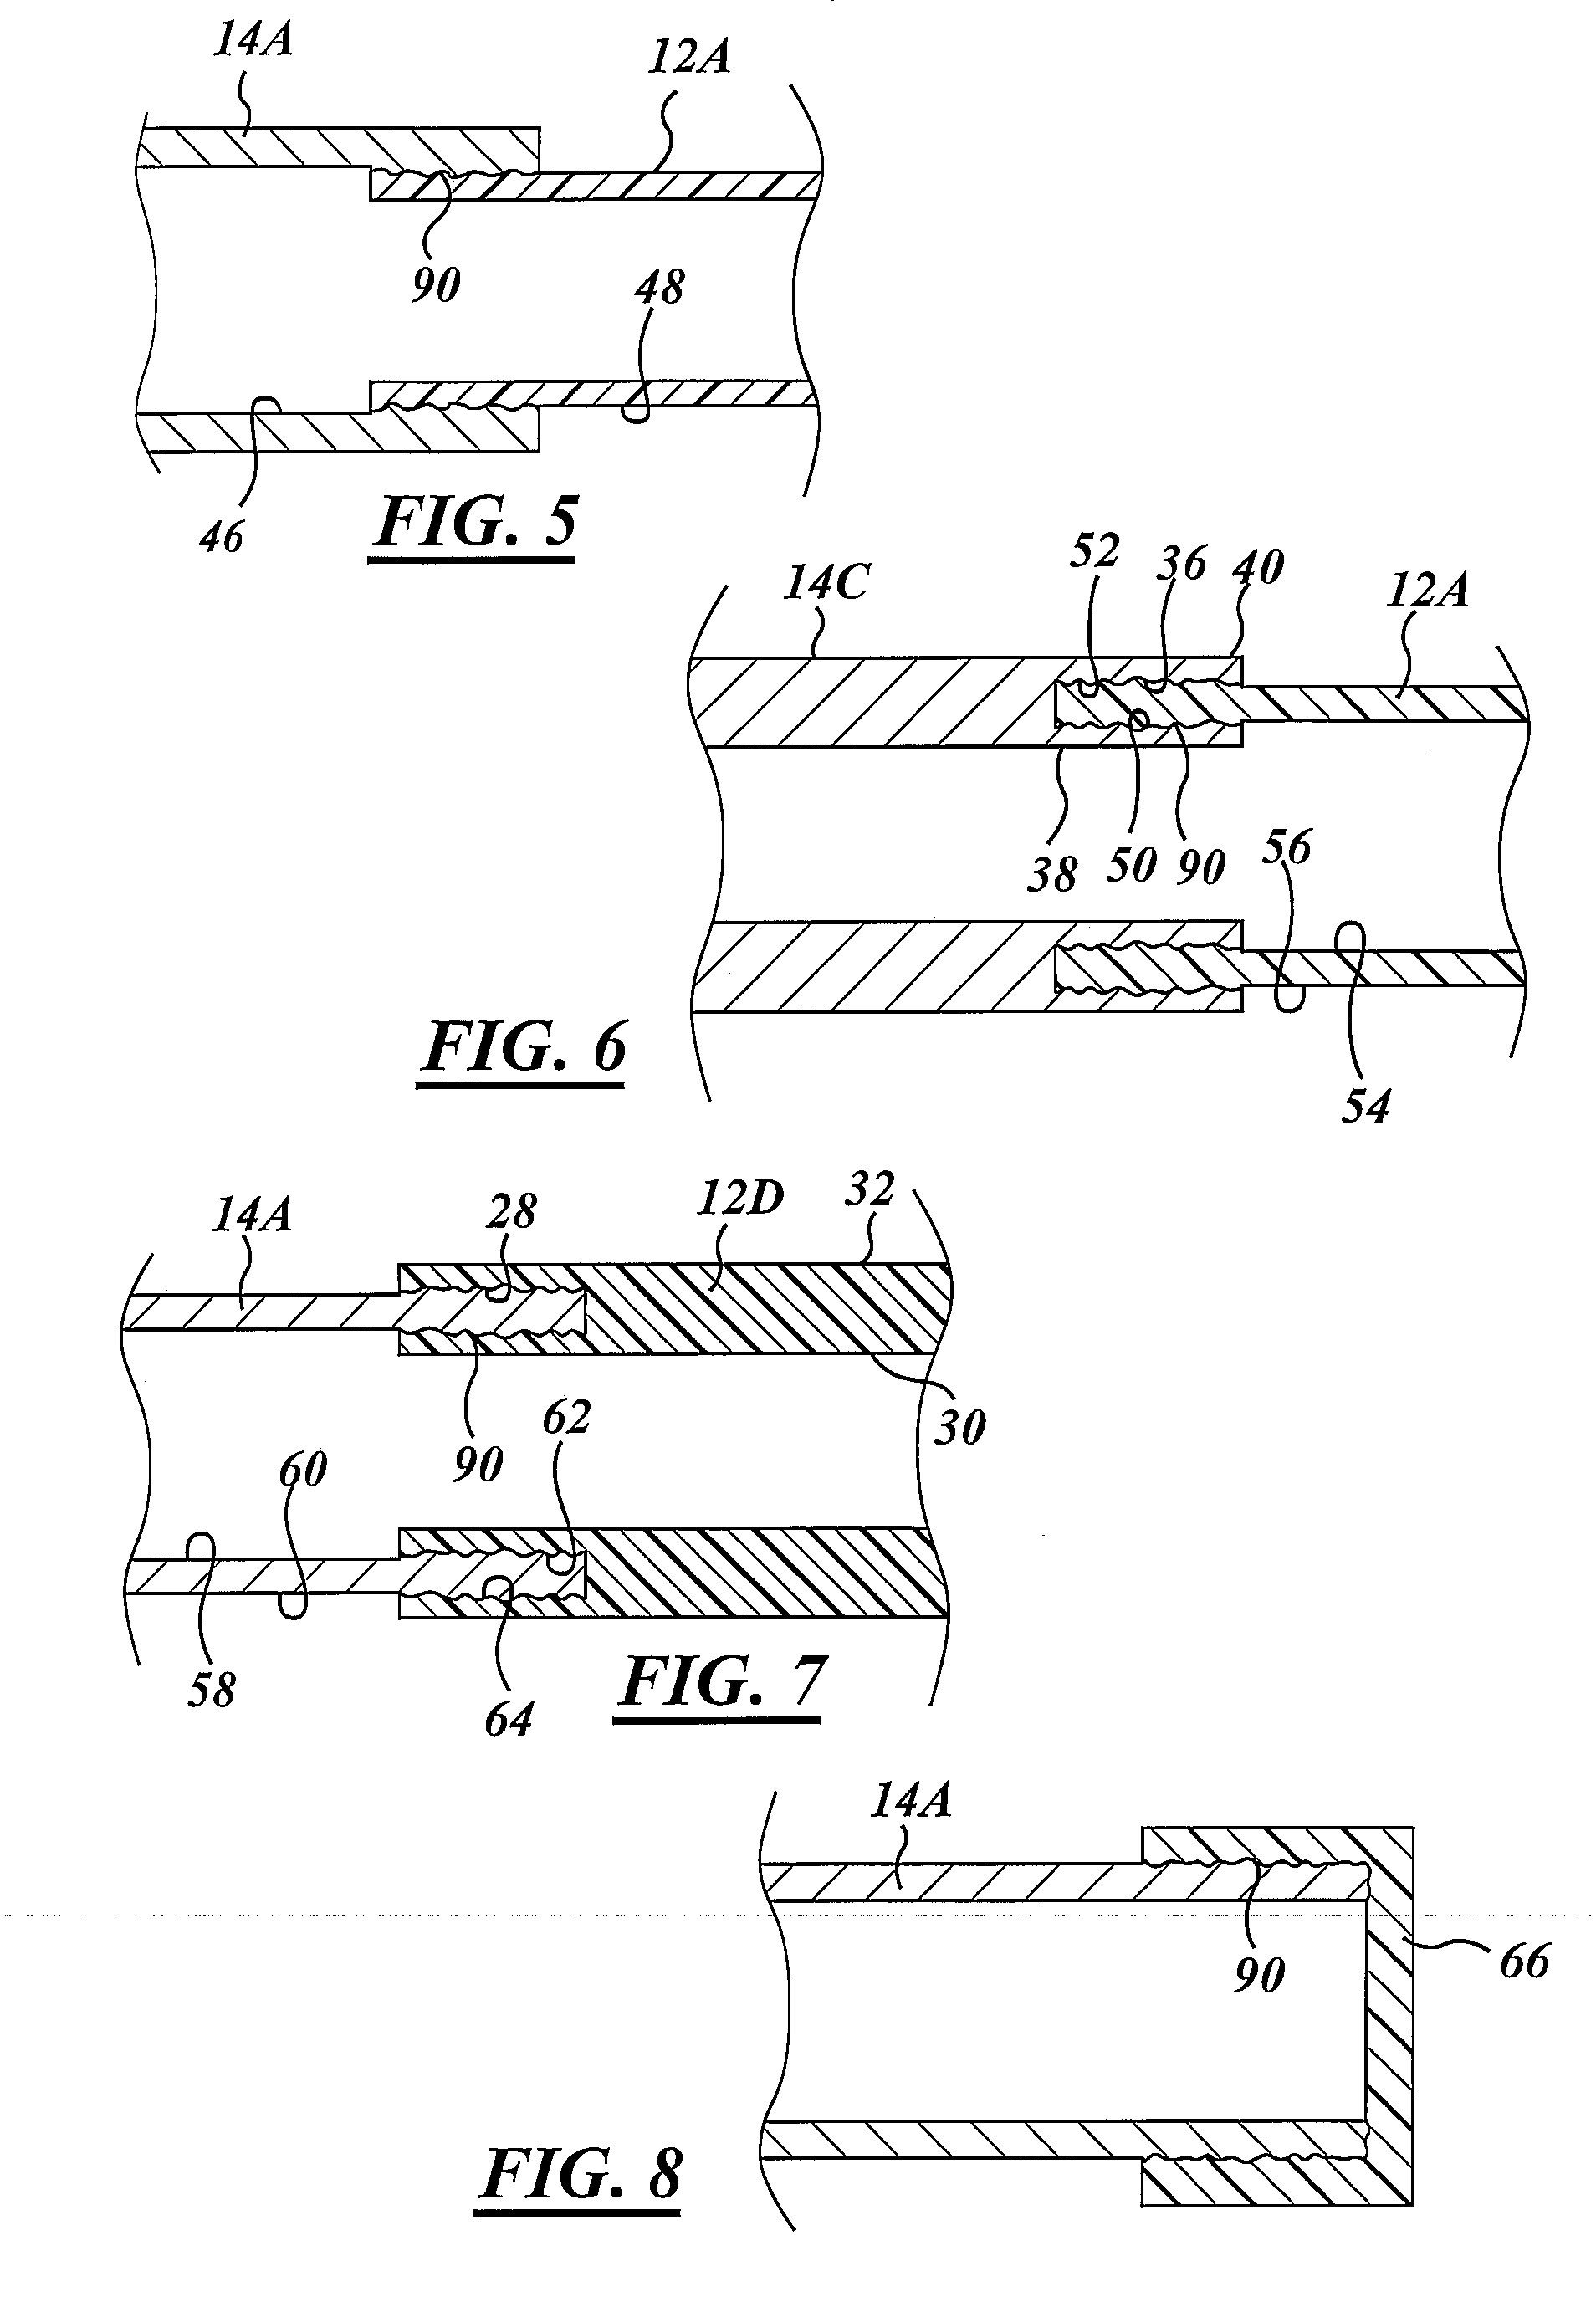 Method of coupling plastic components to metal tubing